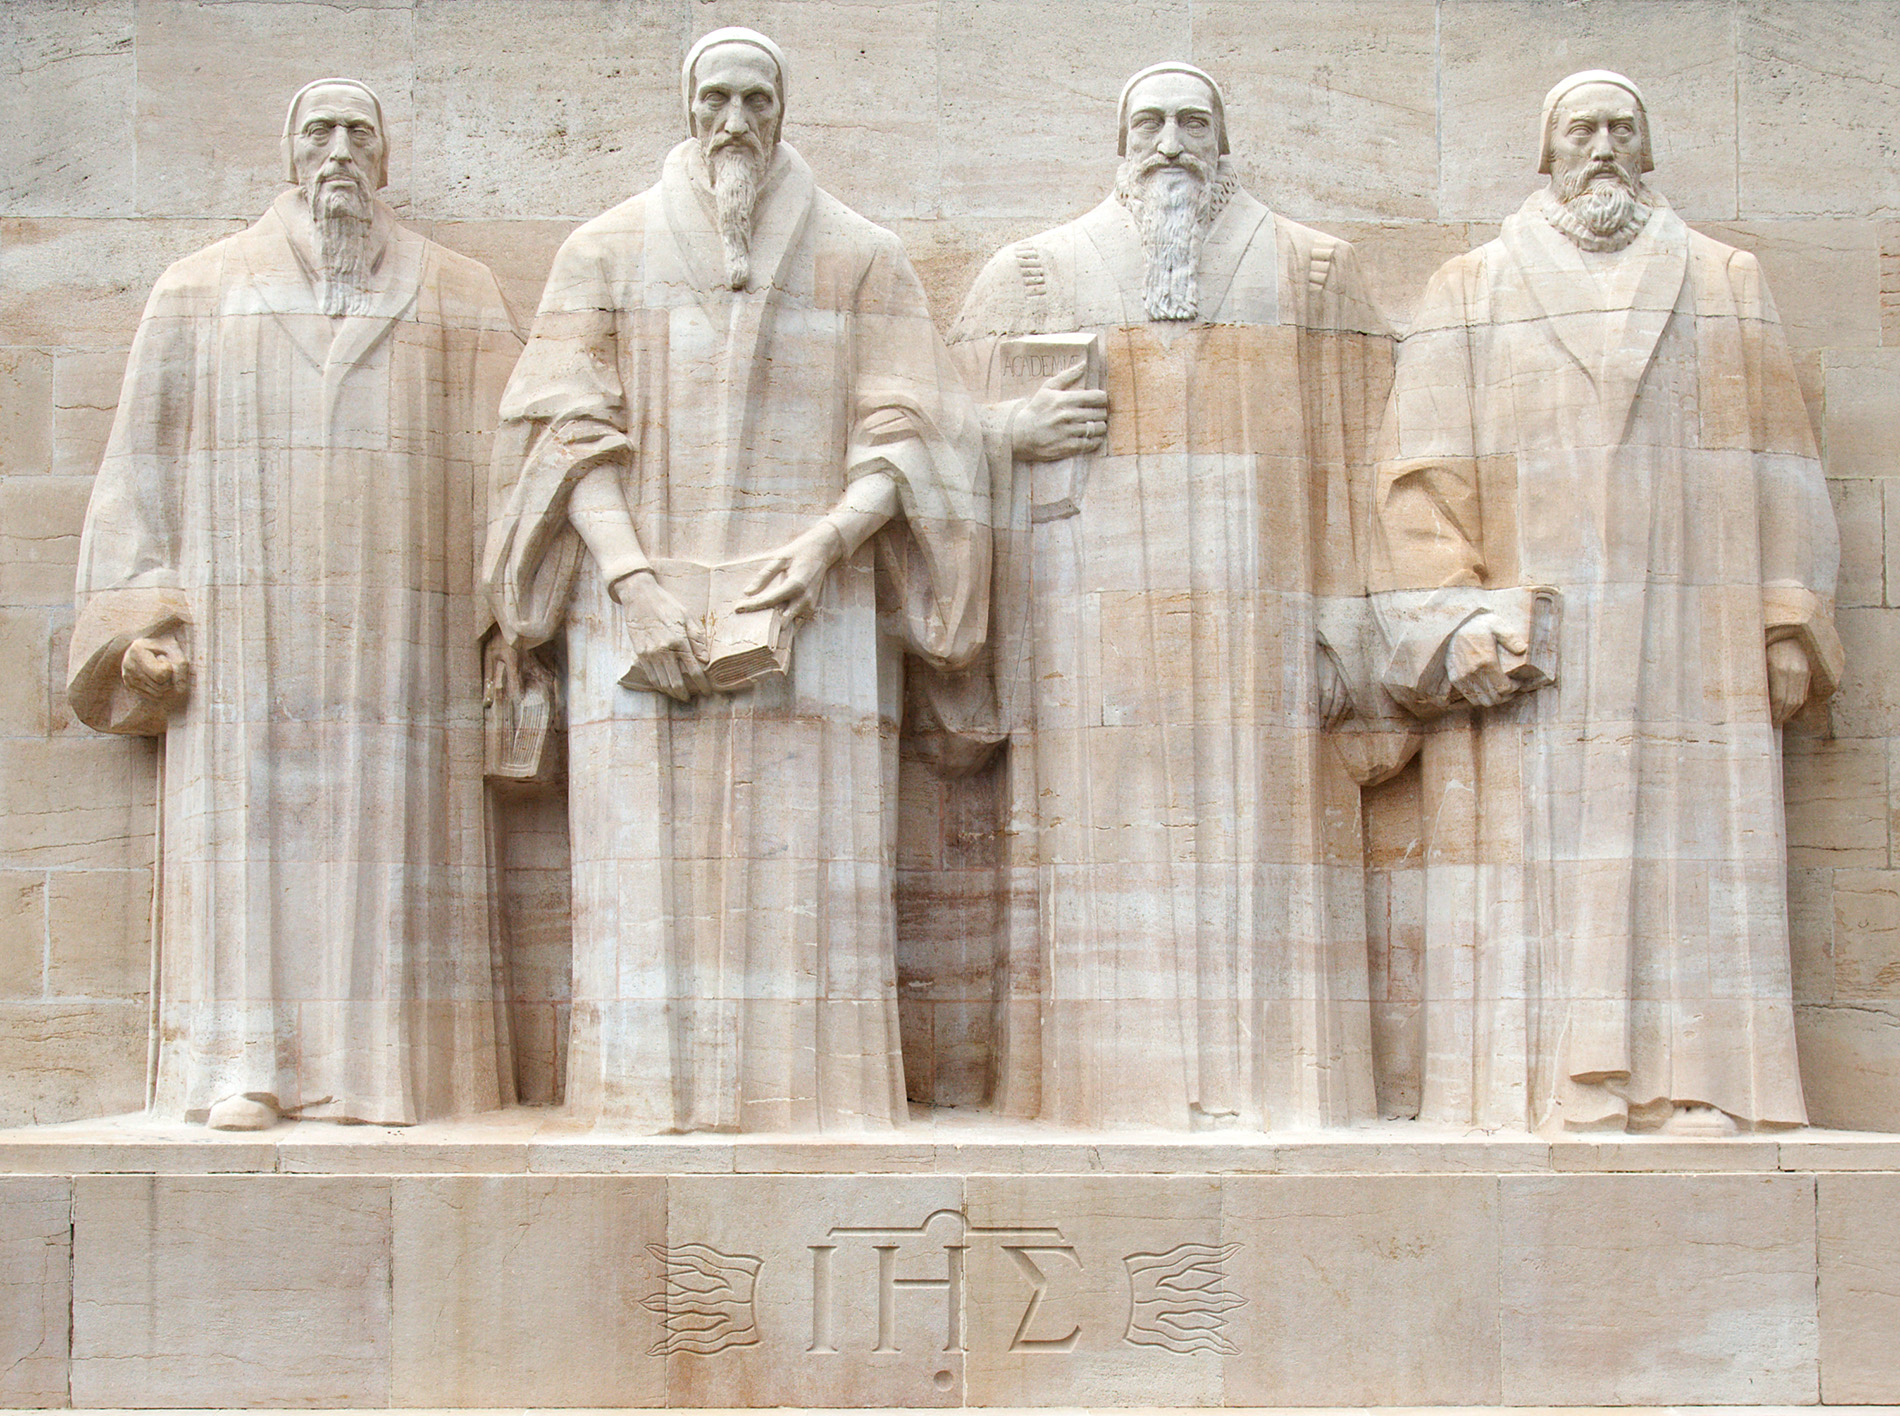 Reformation Monument located in Parc des Bastions, Geneva, Switzerland. The monument displays larger-than-life statues of four key figures of the Reformation, from left to right: William Farel, John Calvin, Theodore Beza, and John Knox. Each figure is carved in detailed relief, with books or scriptures in hand, symbolizing their significant contributions to religious reform.